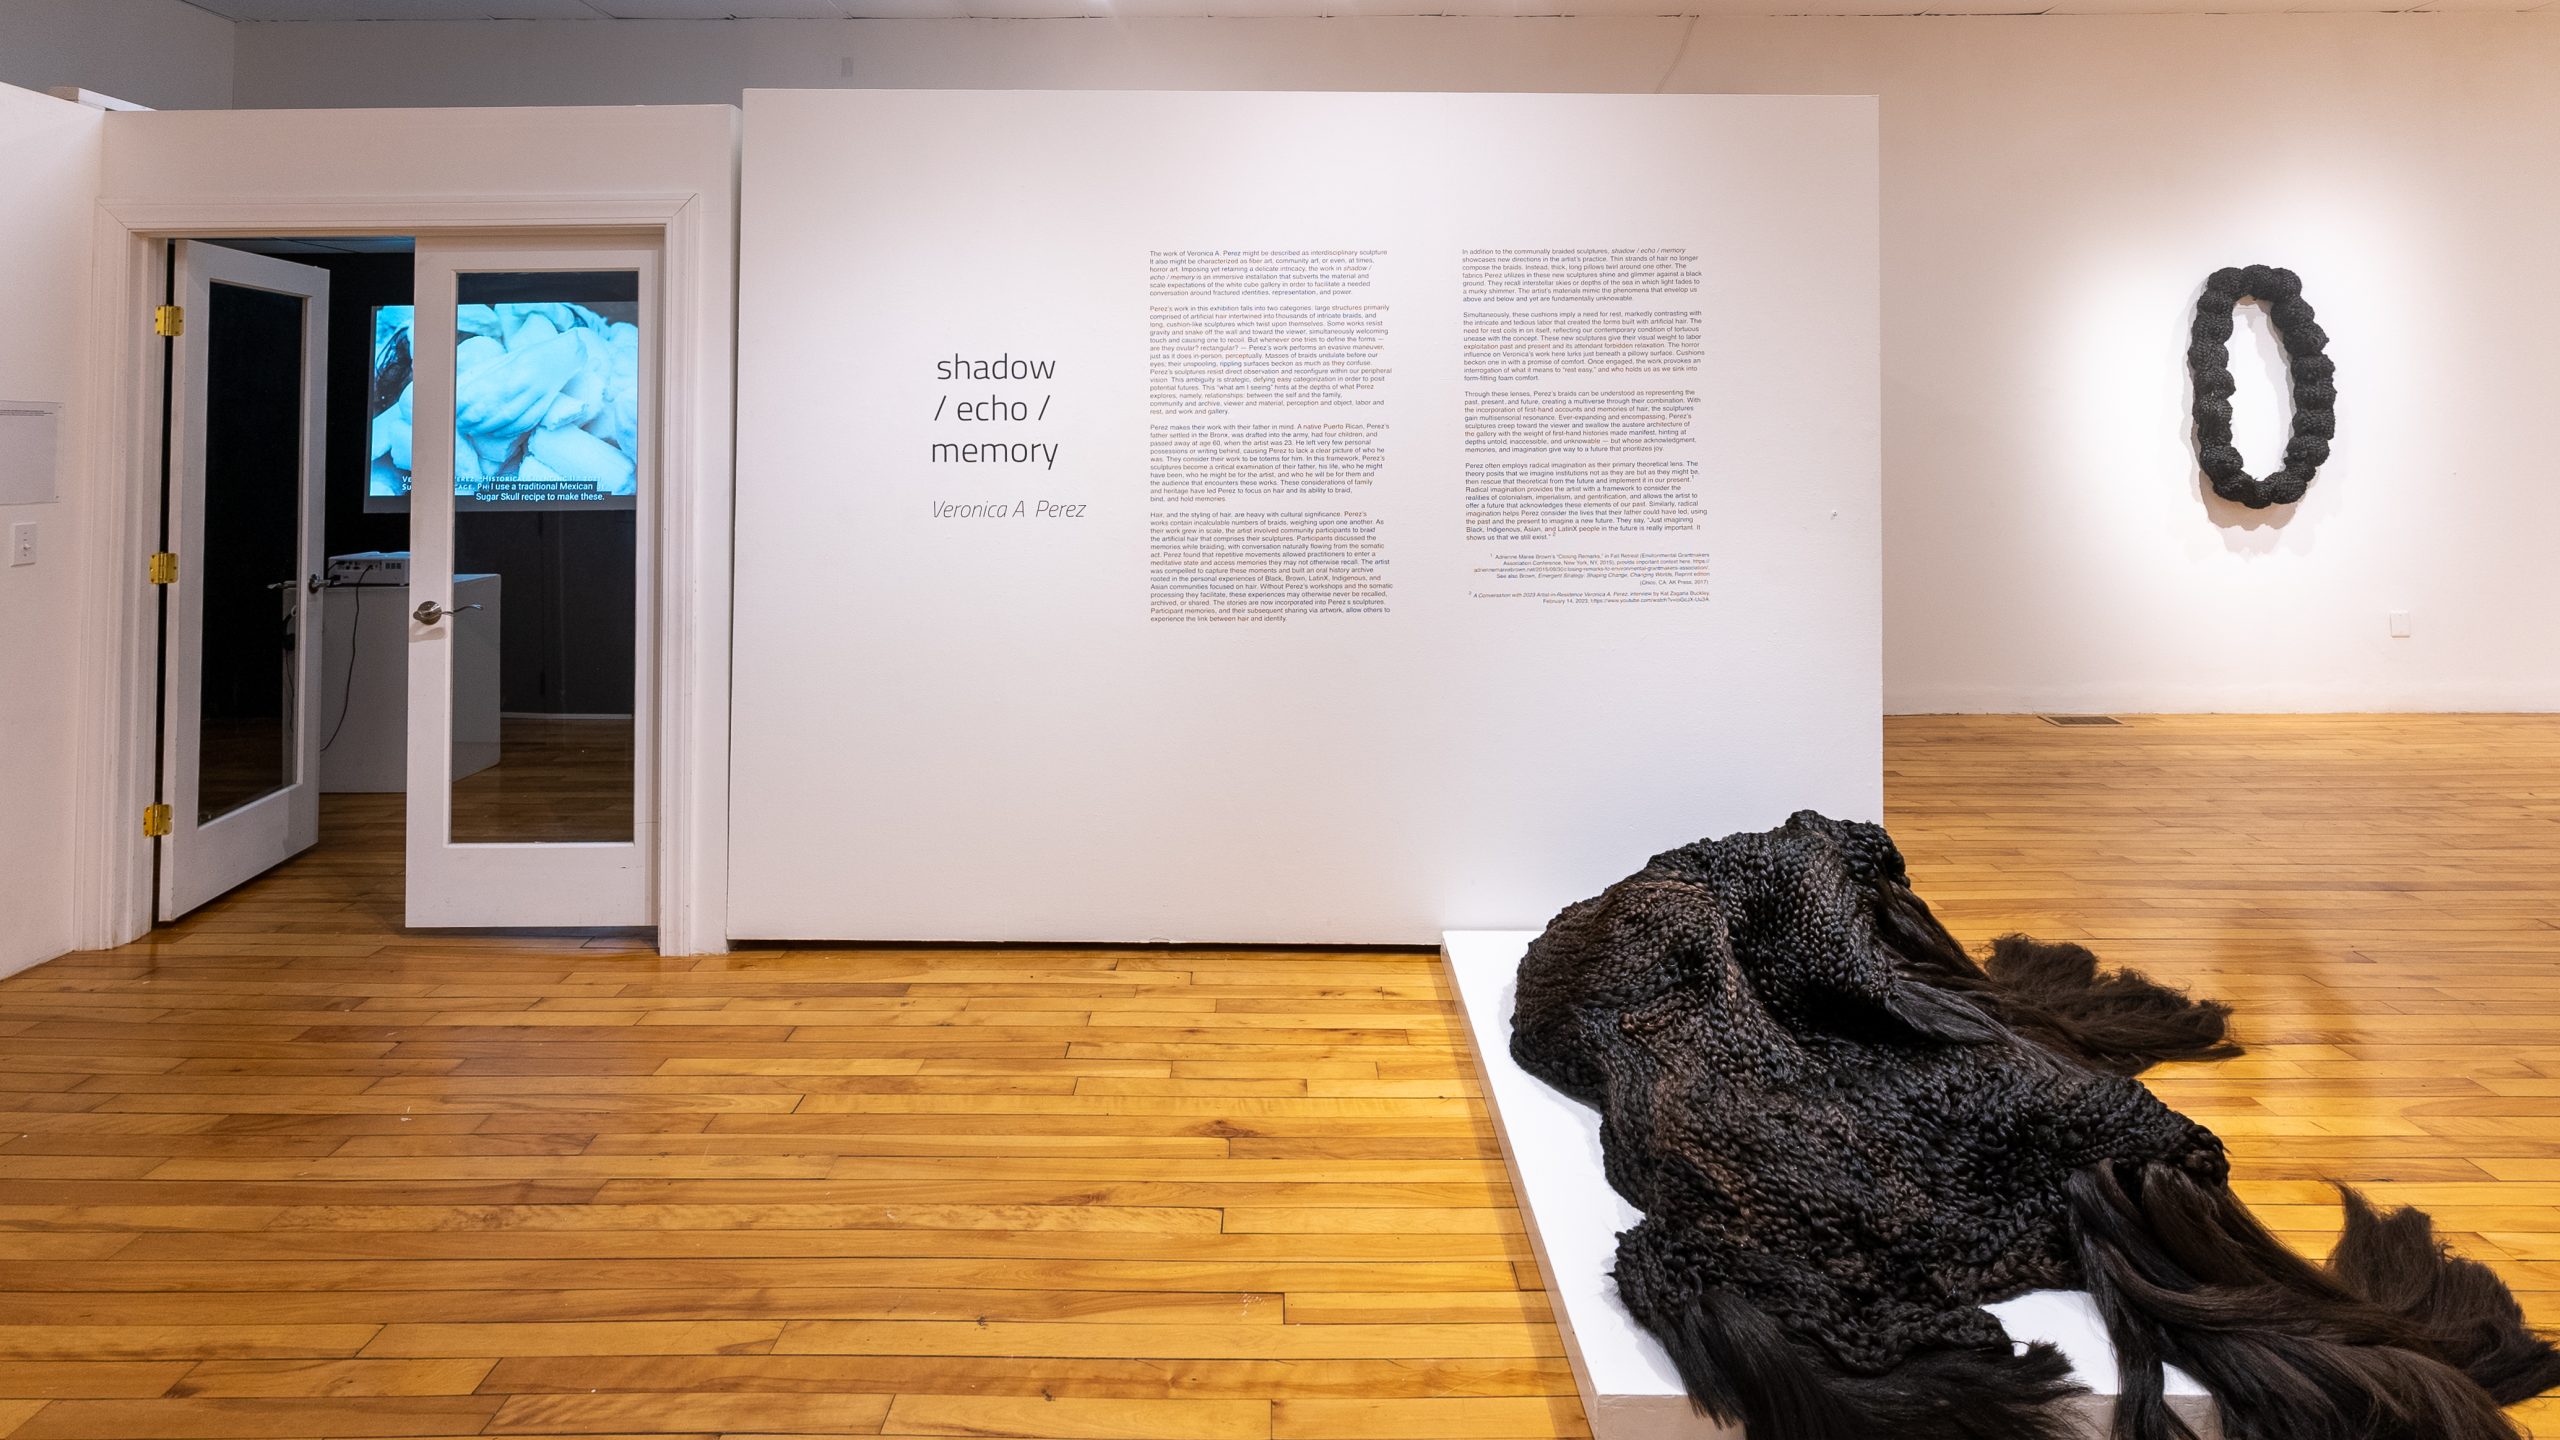 A gallery with white walls and wooden floors. At left: a projection of white clay hands, in middle: vinyl exhibition text; at right: a hair sculpture on a low plinth